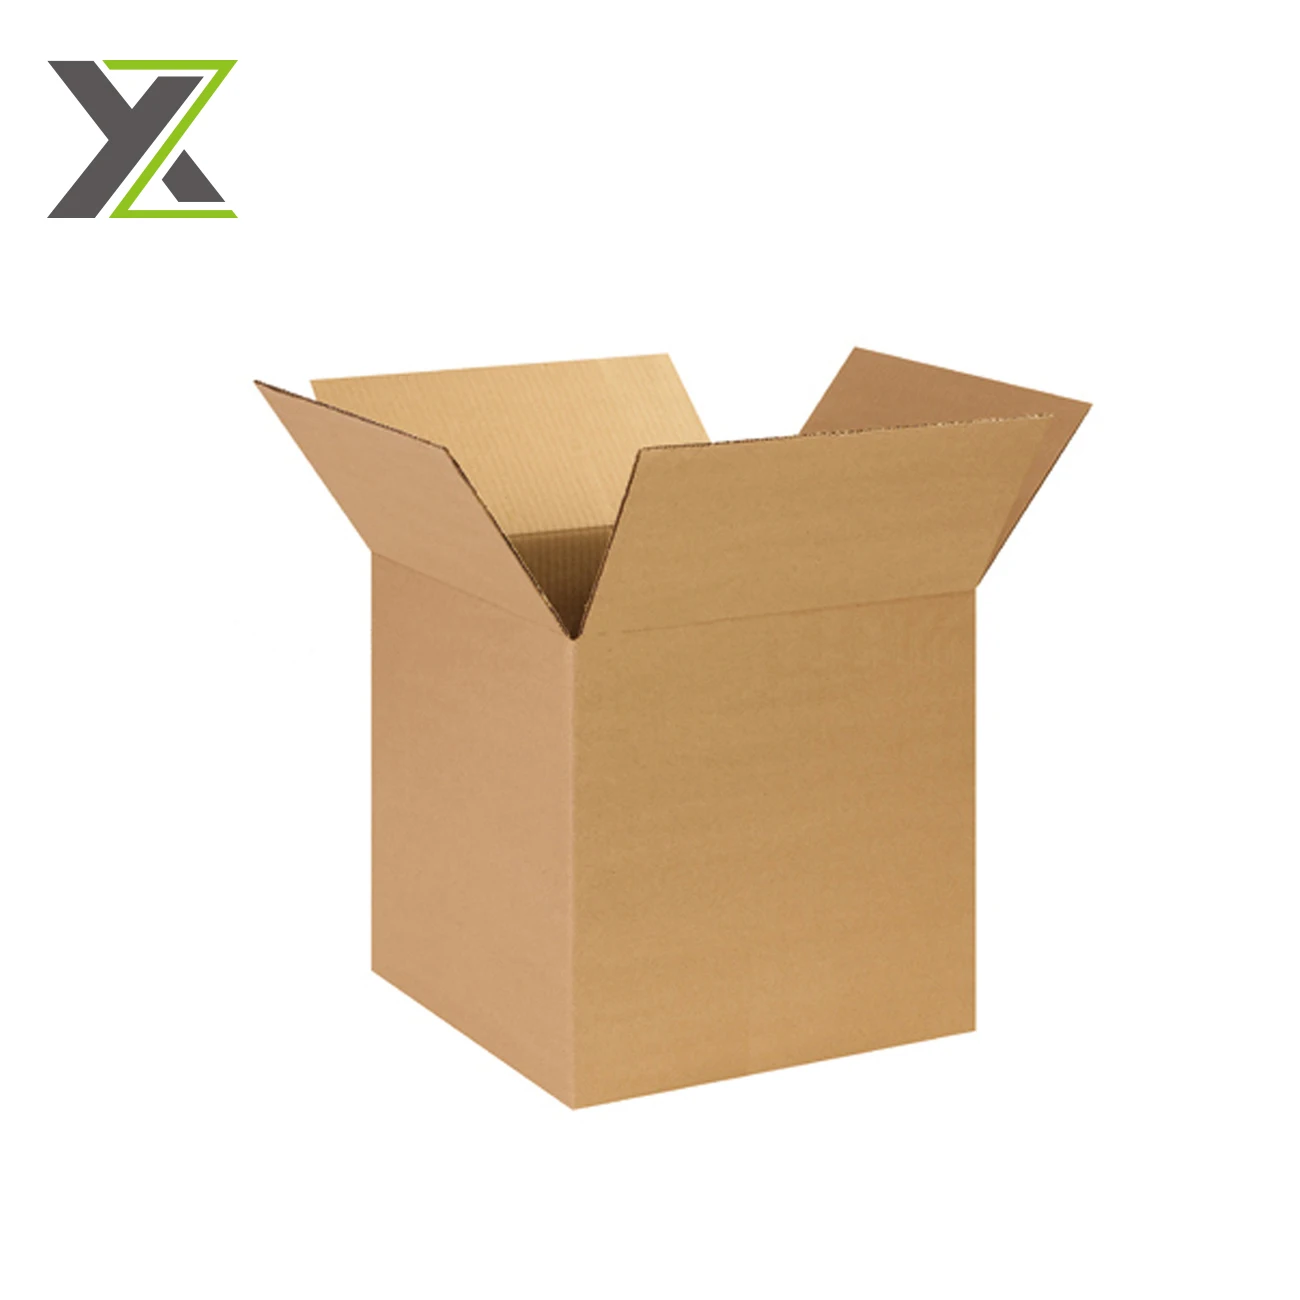 200 x SMALL 7x5x5" S/W MAILING POSTAL CARBOARD BOXES PACKING GIFT CARTONS *FAST* 